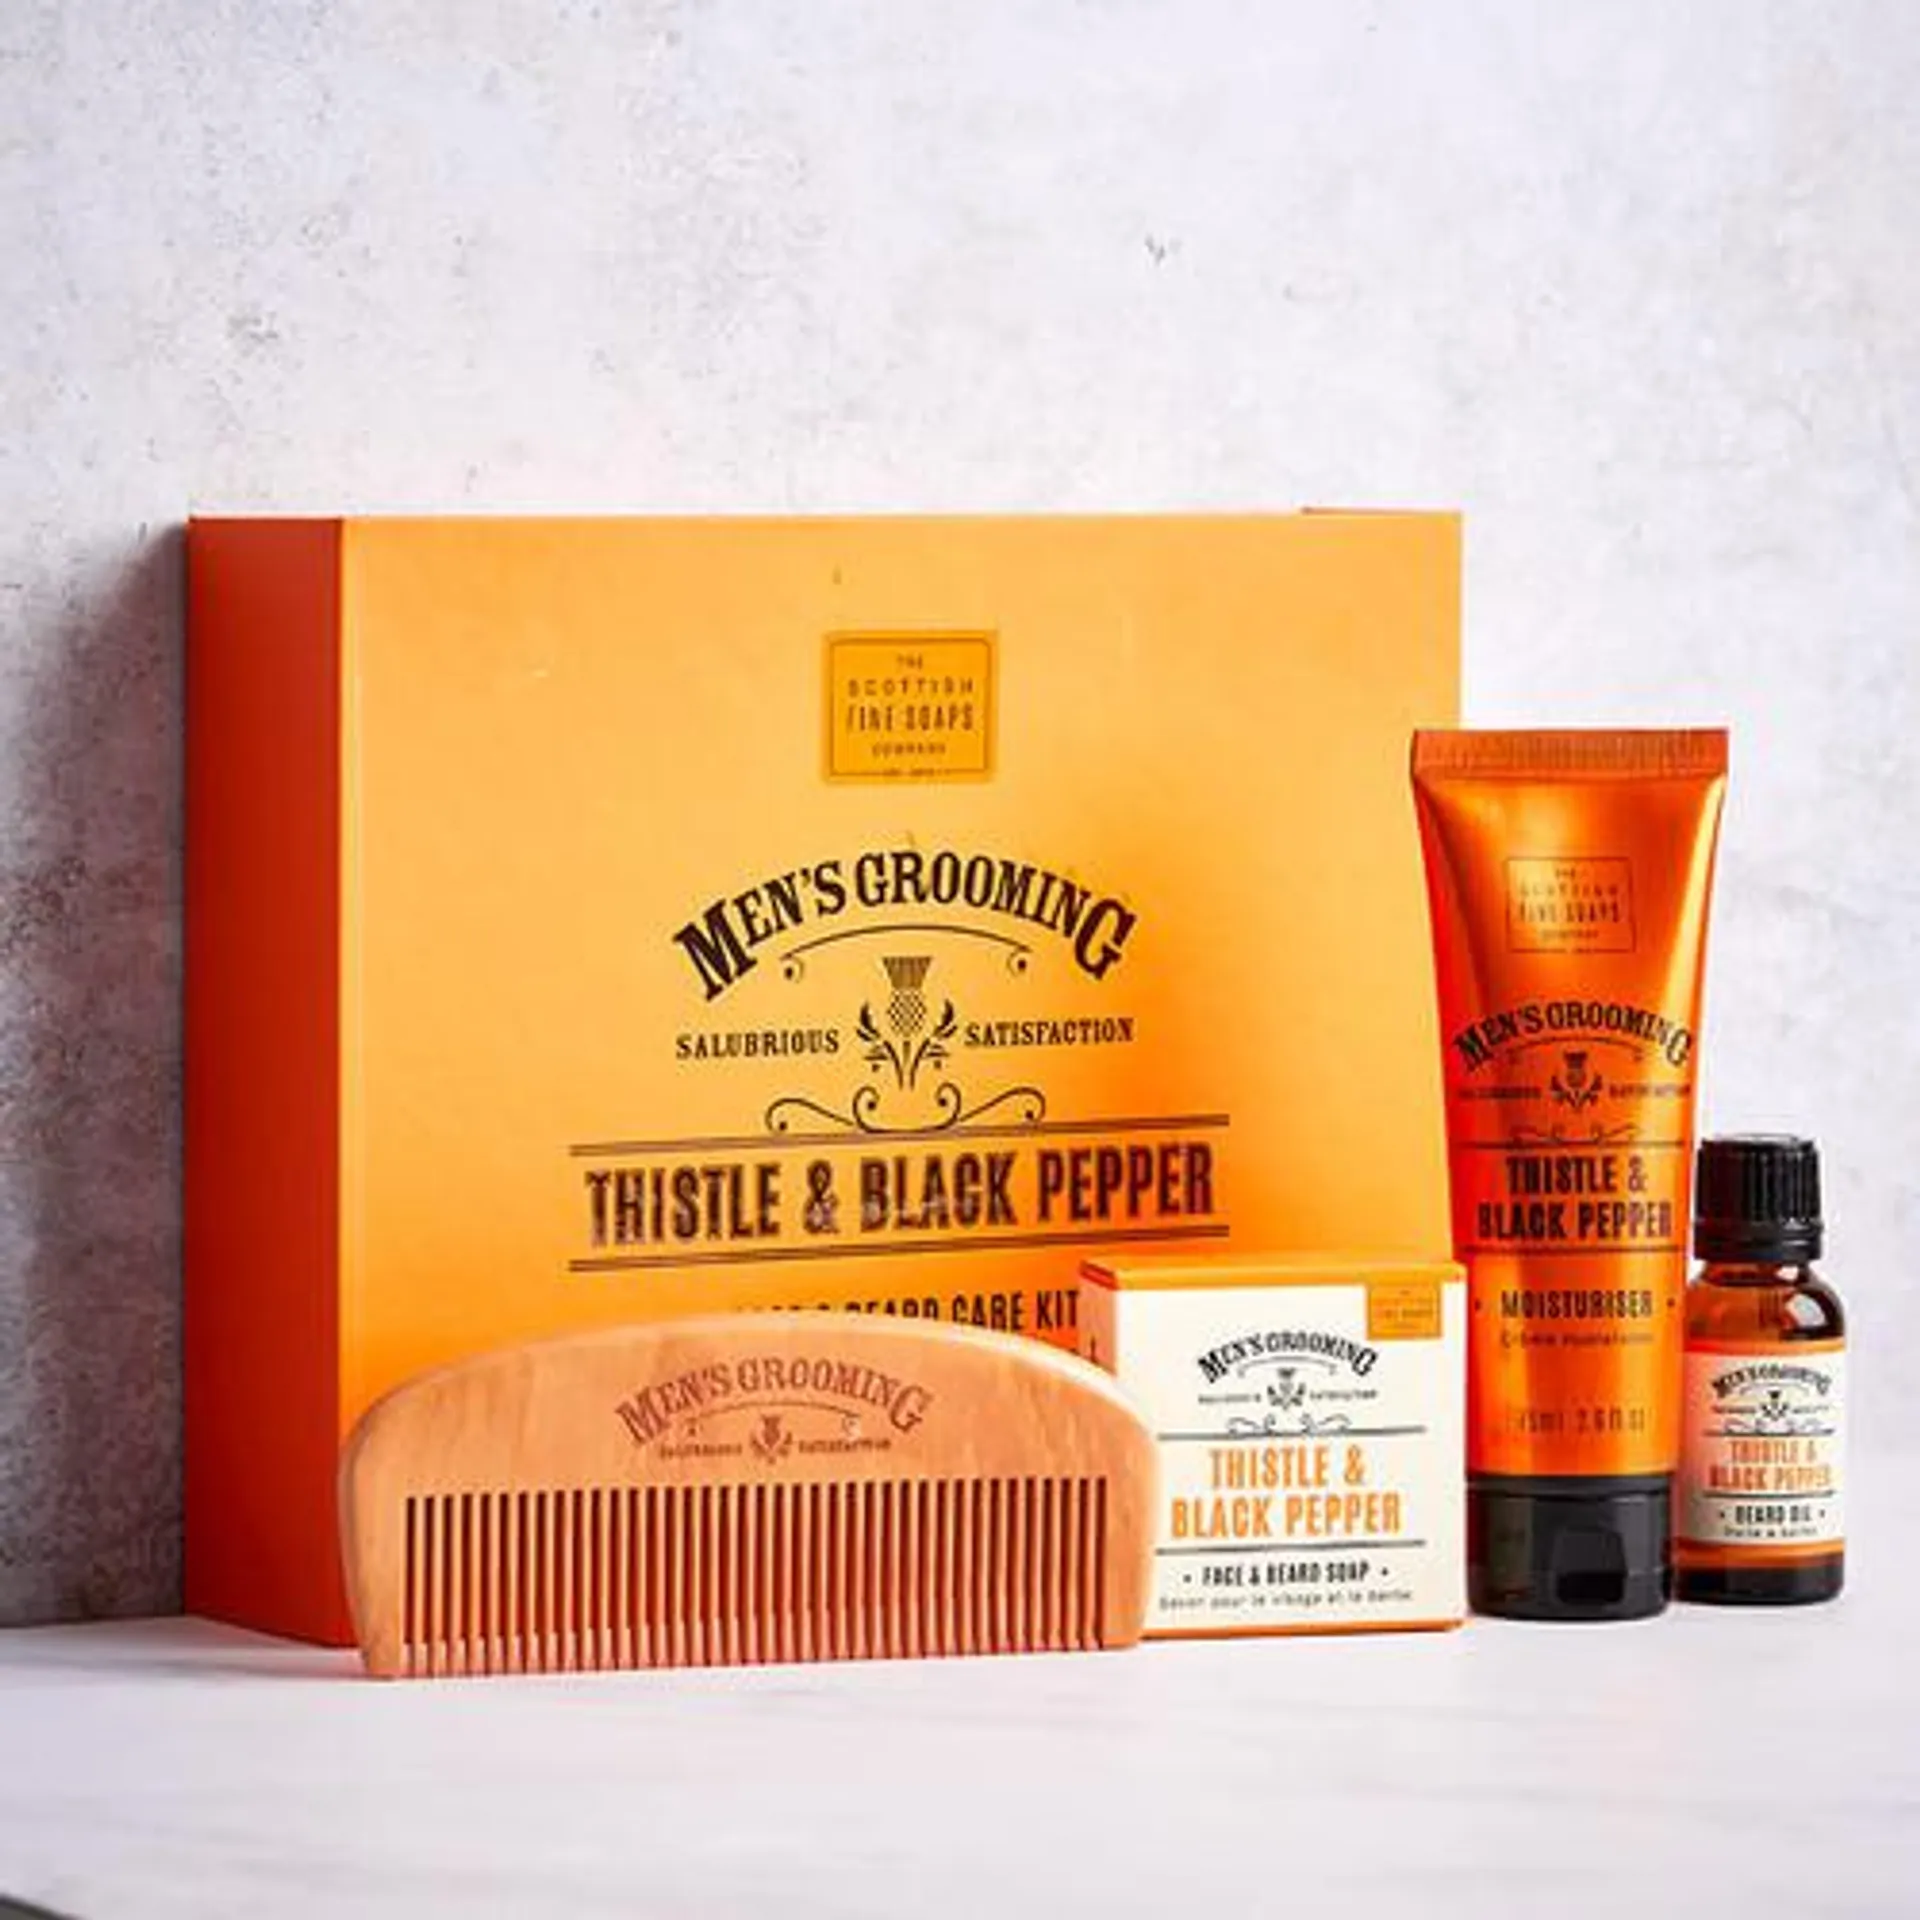 Men’s Grooming Face and Beard Care Kit